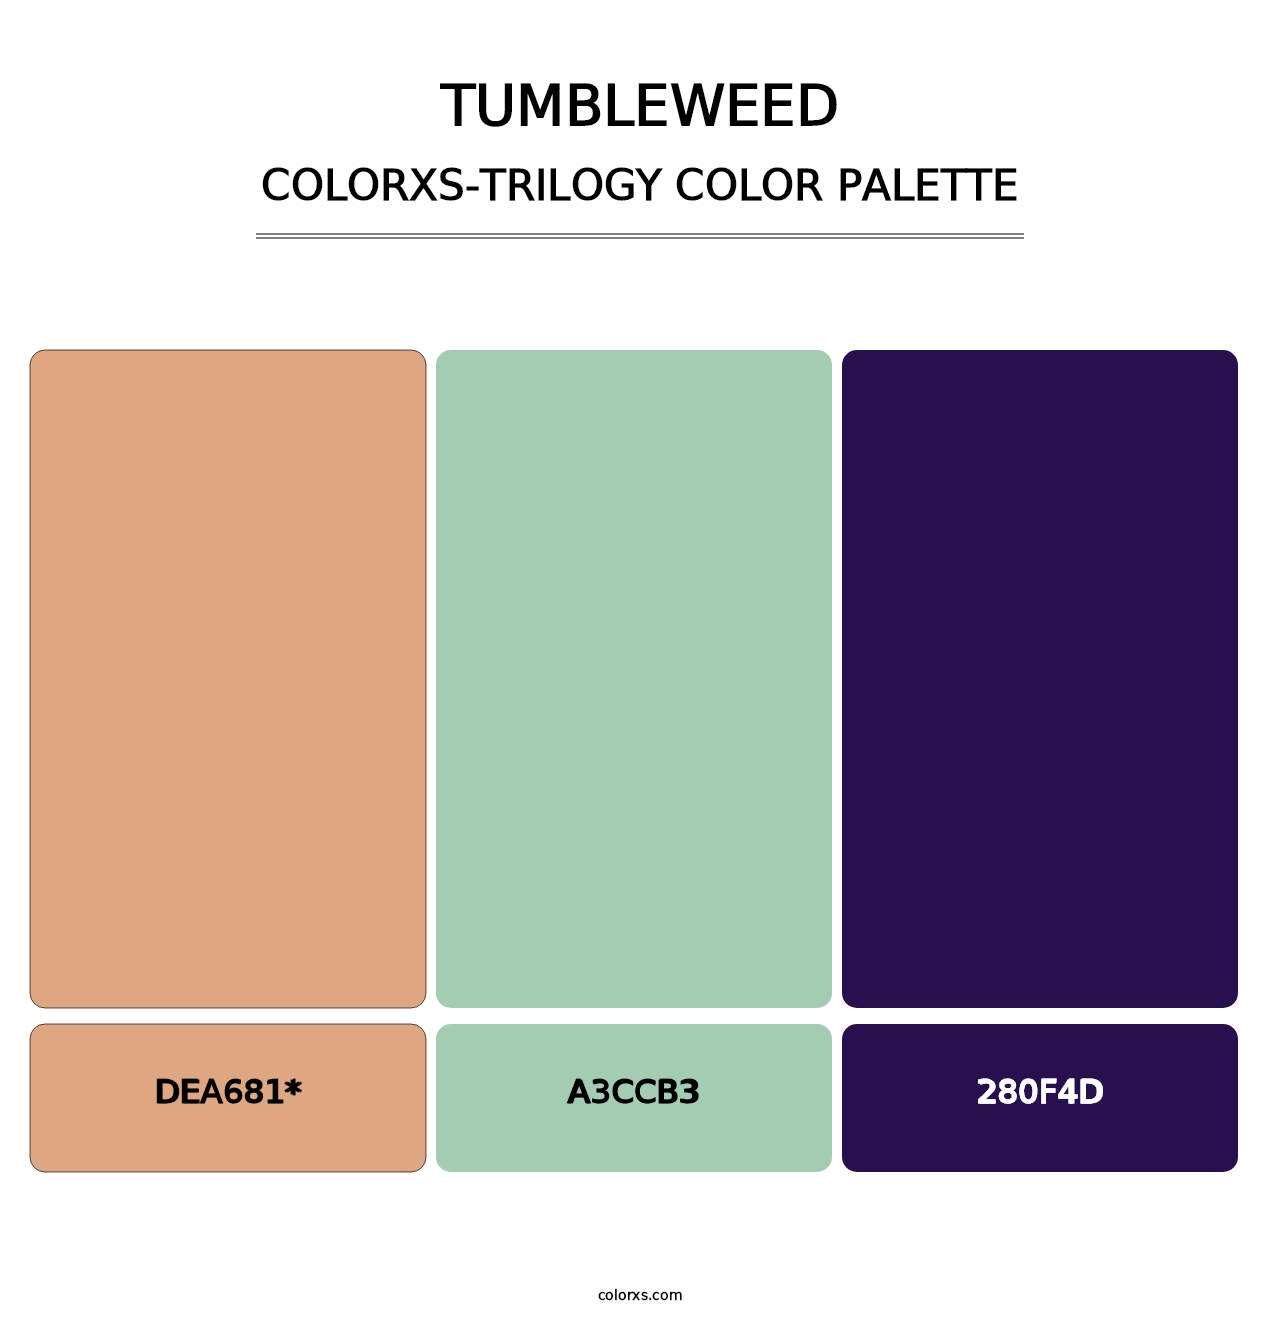 Tumbleweed - Colorxs Trilogy Palette